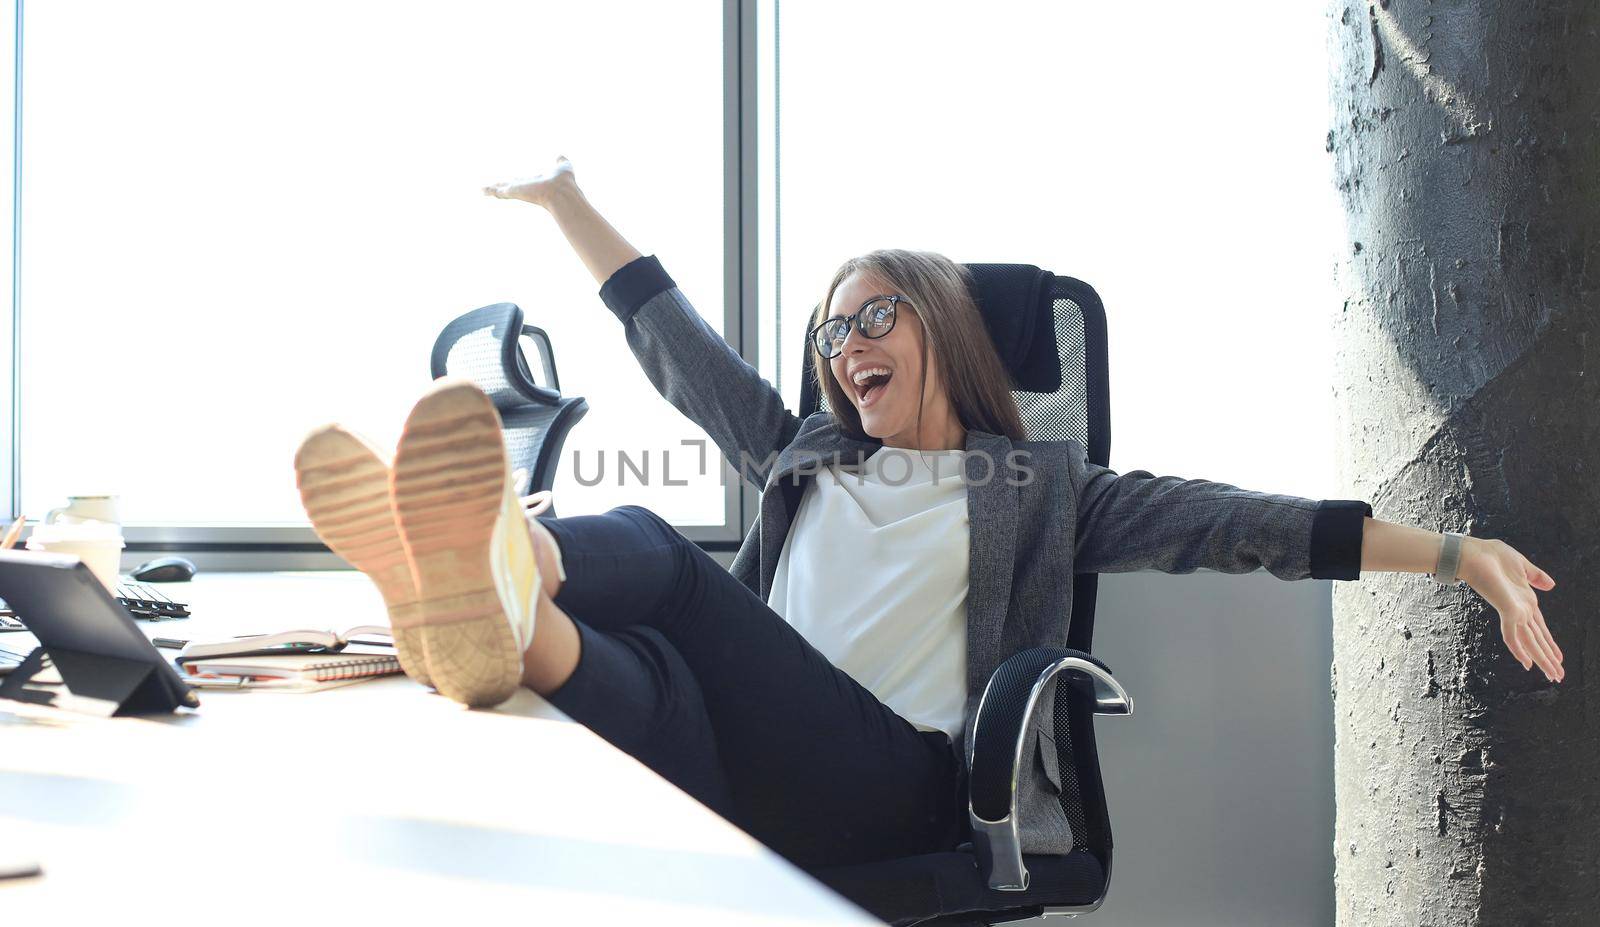 Beautiful business woman is celebrating triumph in business deal at office with hands up. Business lady is relaxing in office